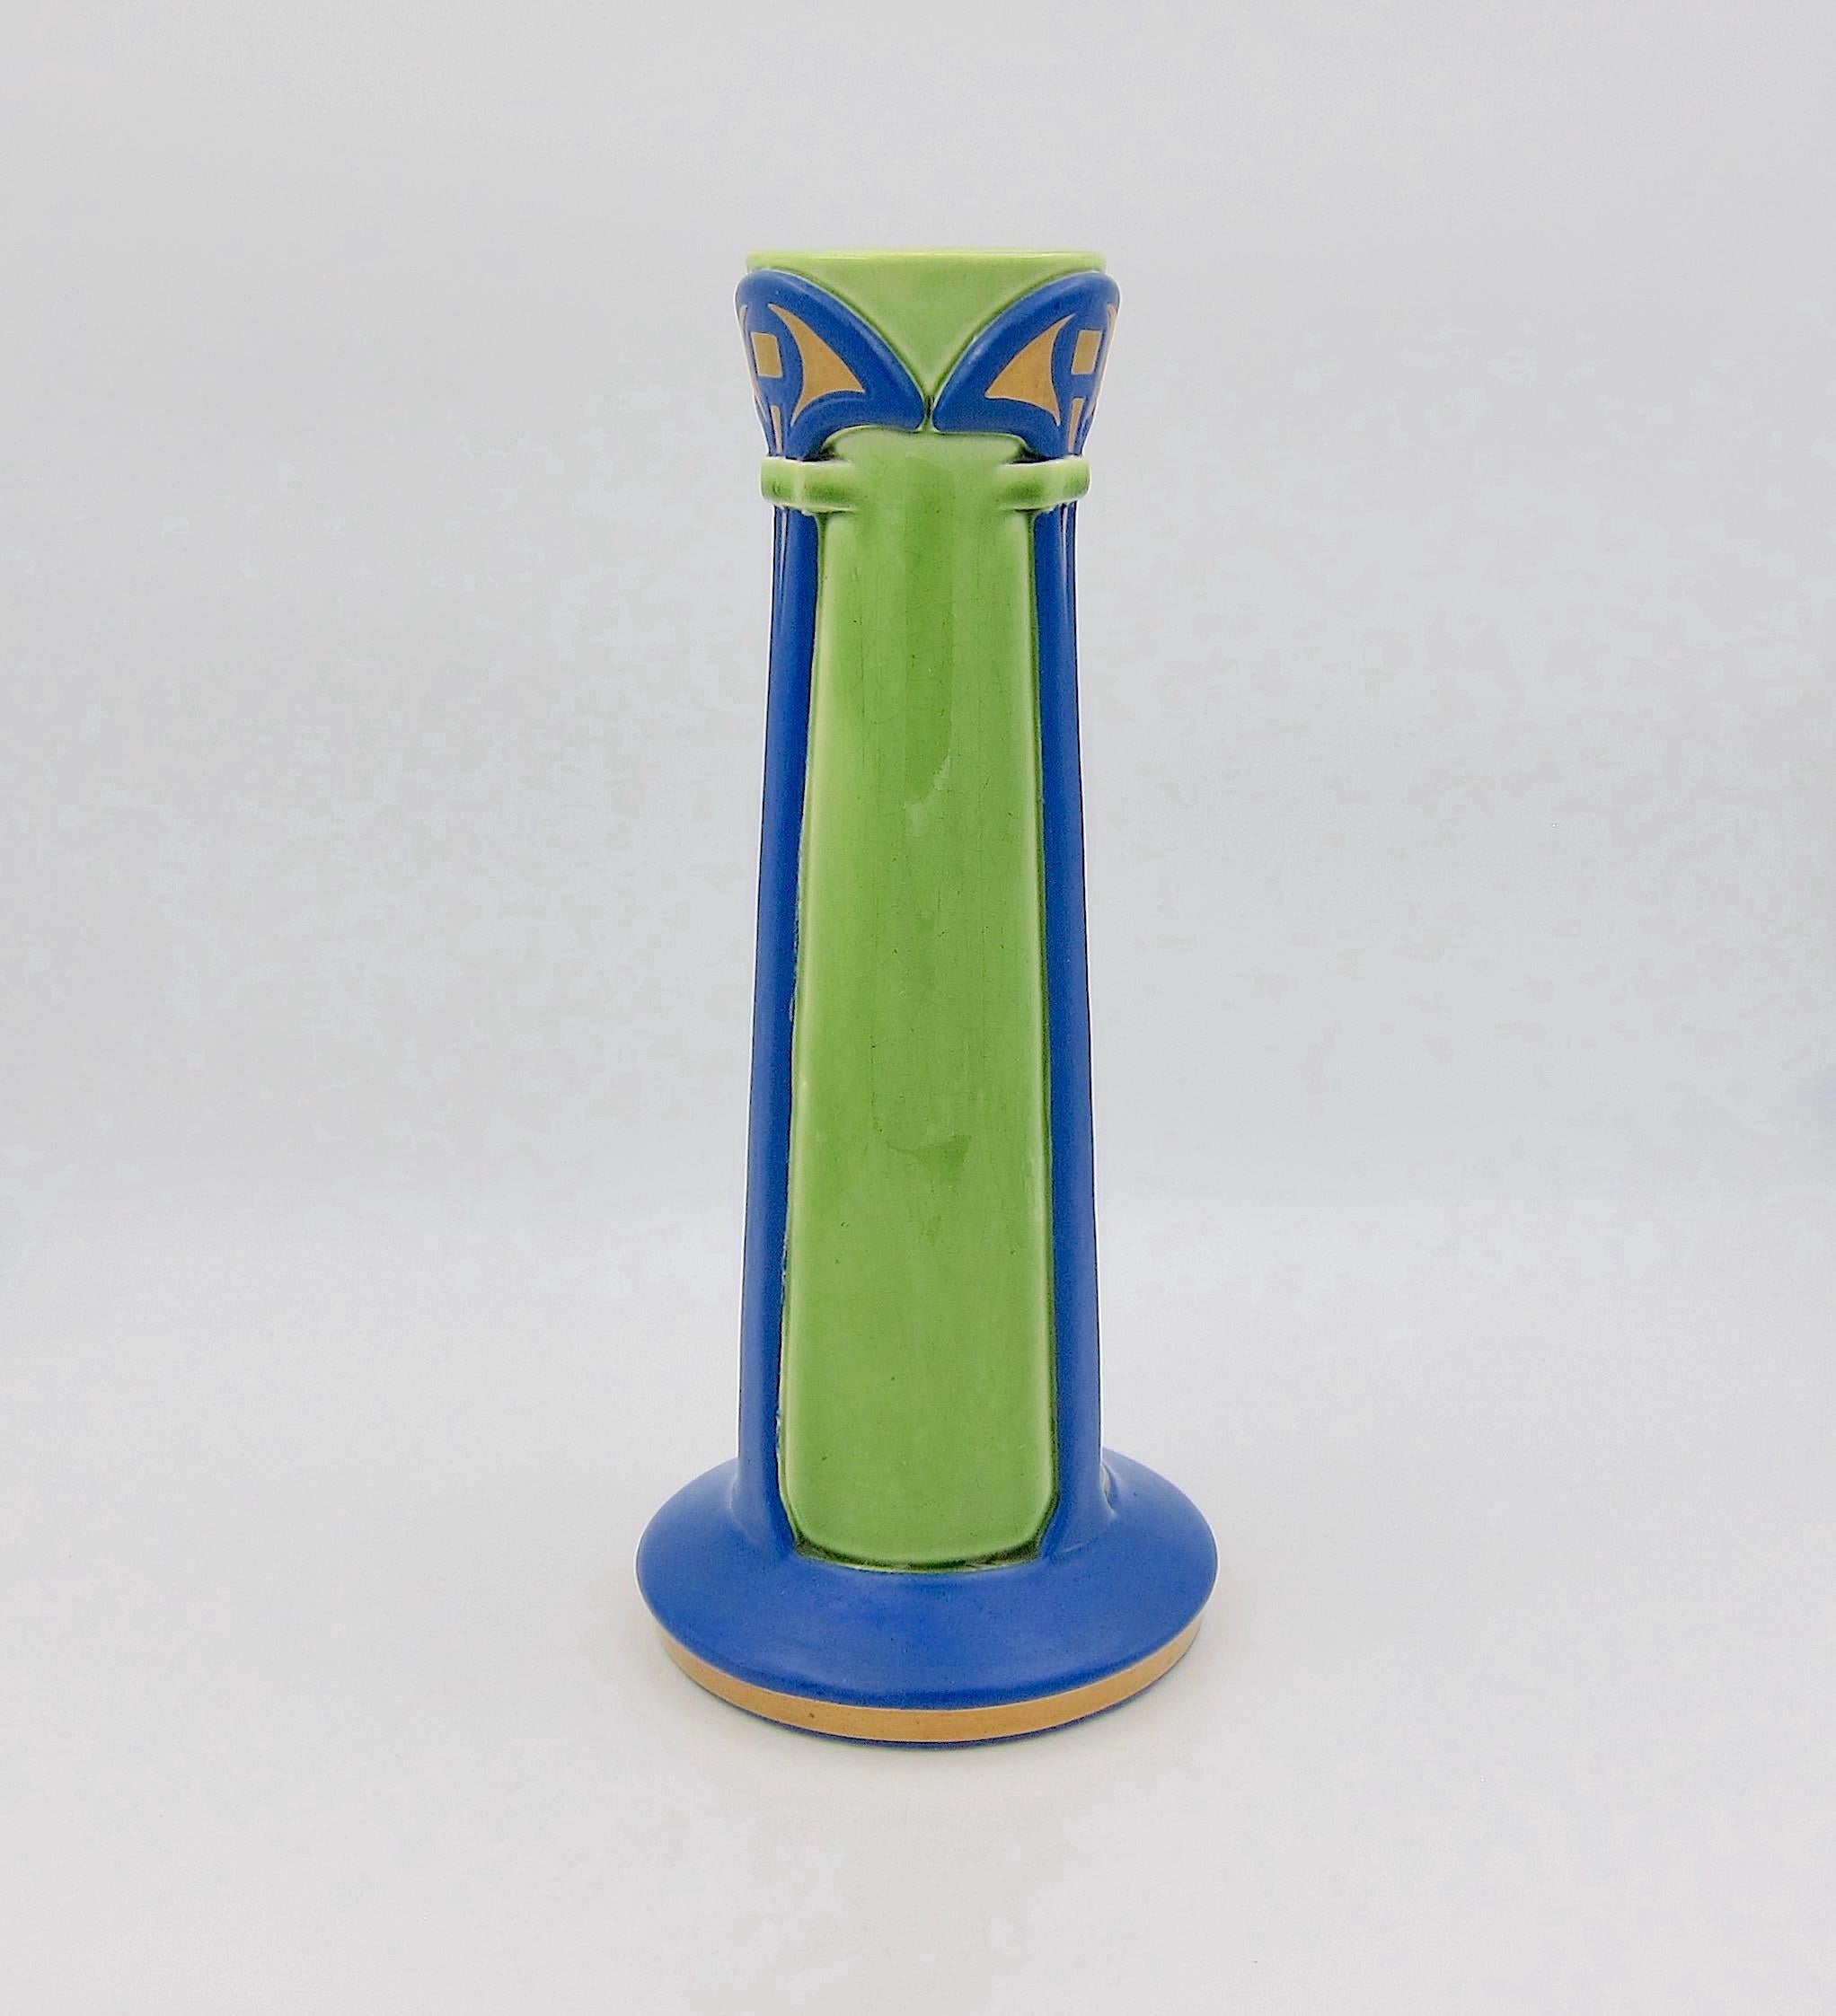 Art Deco French Sarreguemines Art Pottery Vase in Blue, Green and Gold, Marked 1906